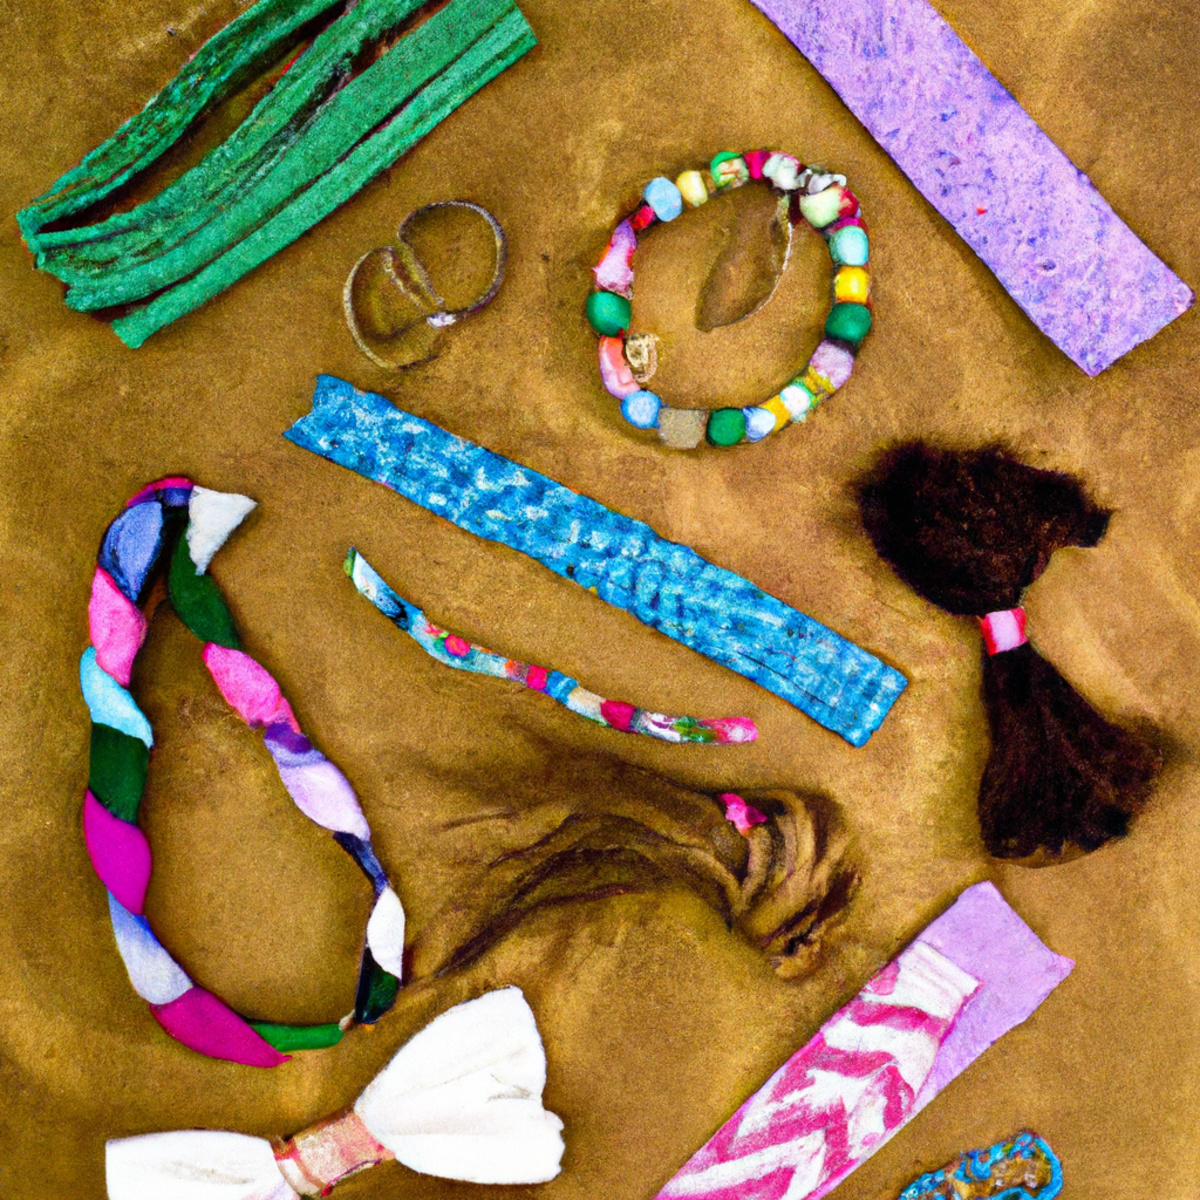 Vibrant eco-friendly hair accessories: sustainable hair ties and bands in playful colors and patterns, elegantly displayed.